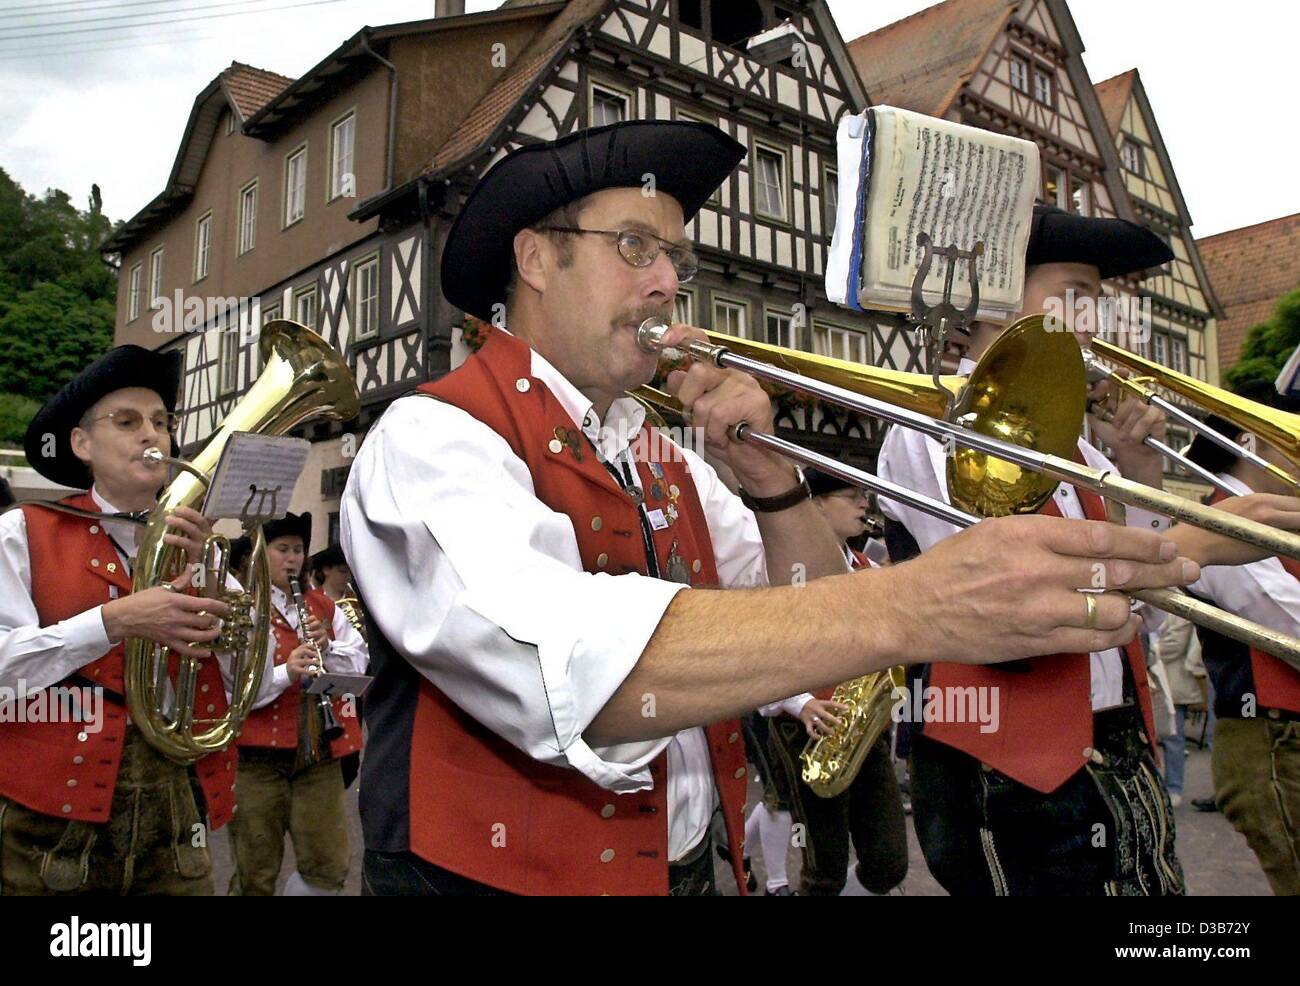 (dpa) - A traditional brass band marches through the city of Calw, Germany, celebrating its famous son, Nobel Prize laureate Hermann Hesse (1877-1962), 2 July 2002. The day marked the 125th birthday of the German author.  Hesse achieved international acknowledgement with novels like 'Siddharta' and  Stock Photo